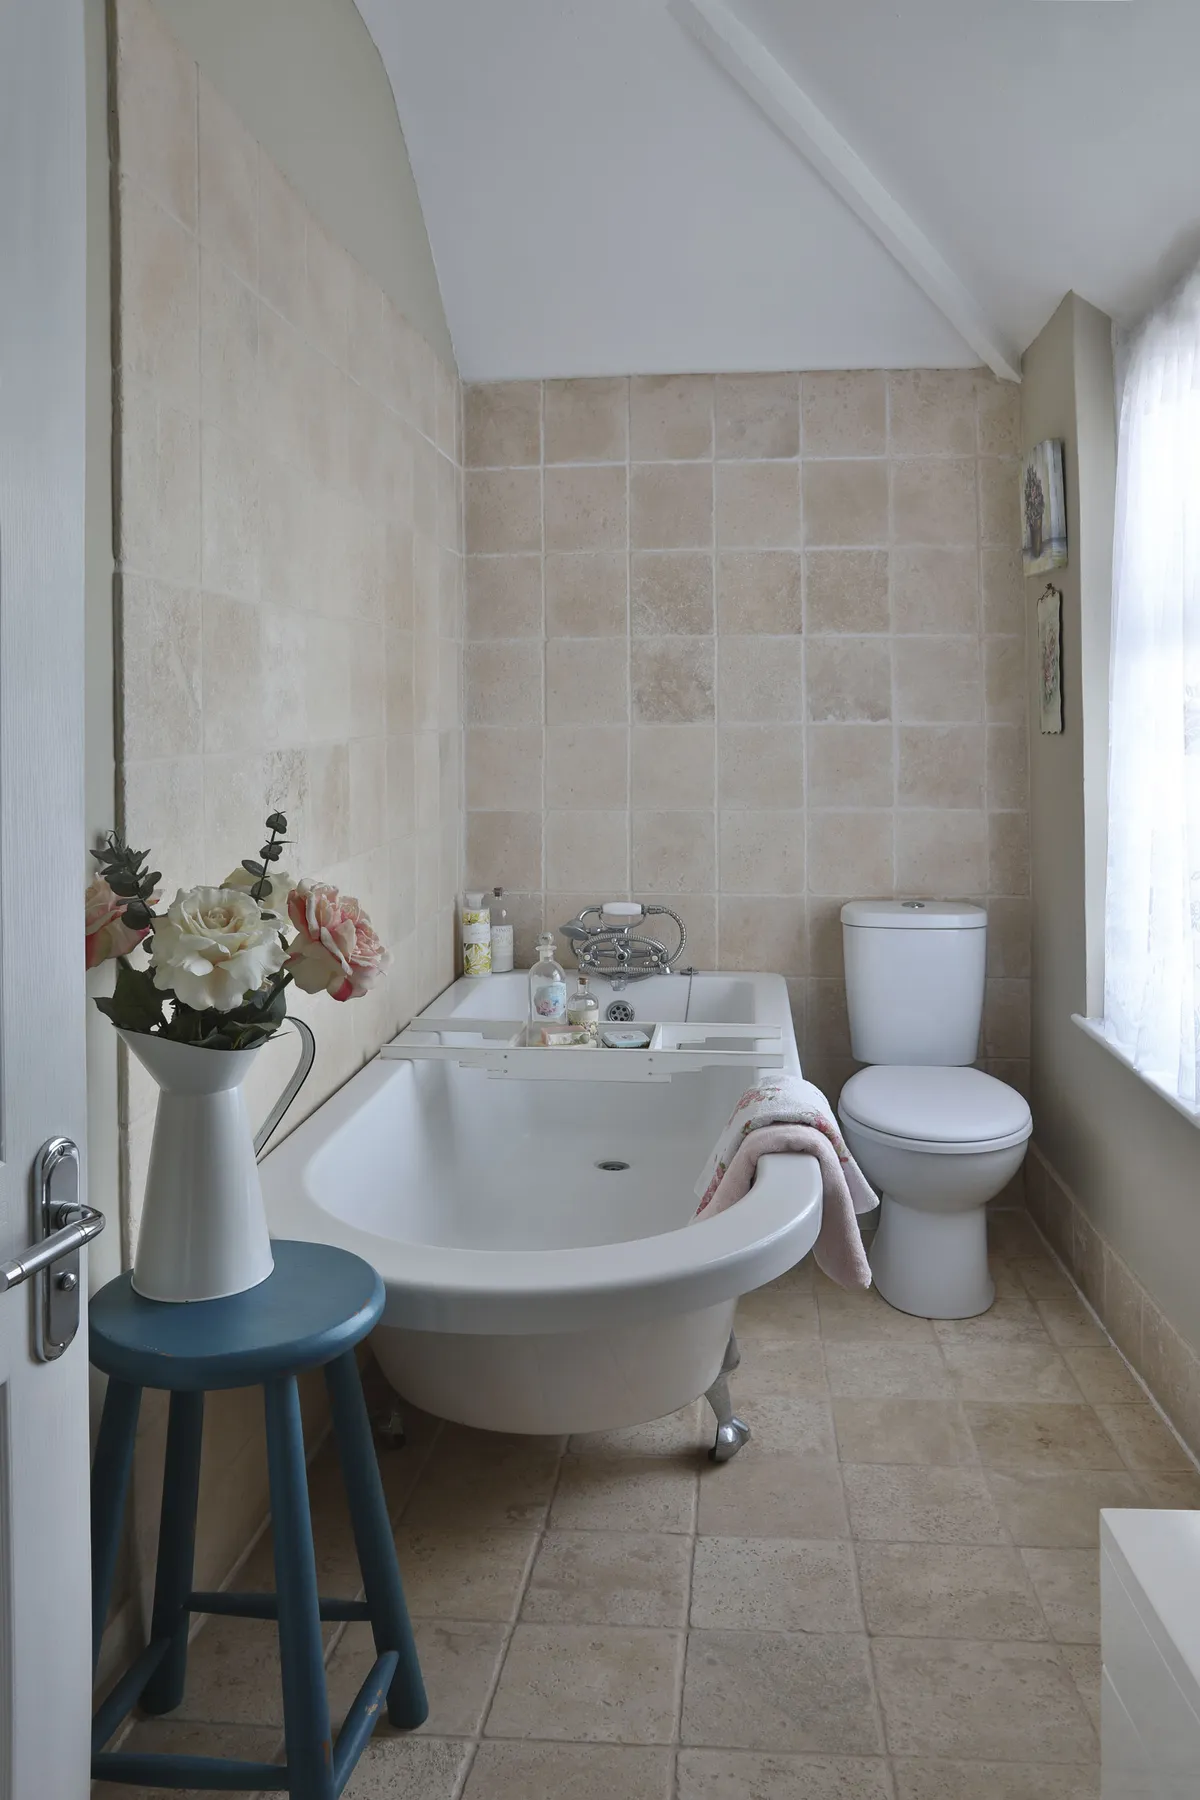 Hildah mixed modern with traditional in her bathroom with a single-ended rolltop bath from Victorian Plumbing, and Travertine tiles from Topps Tiles. An upcycled blue stool adds a splash of colour